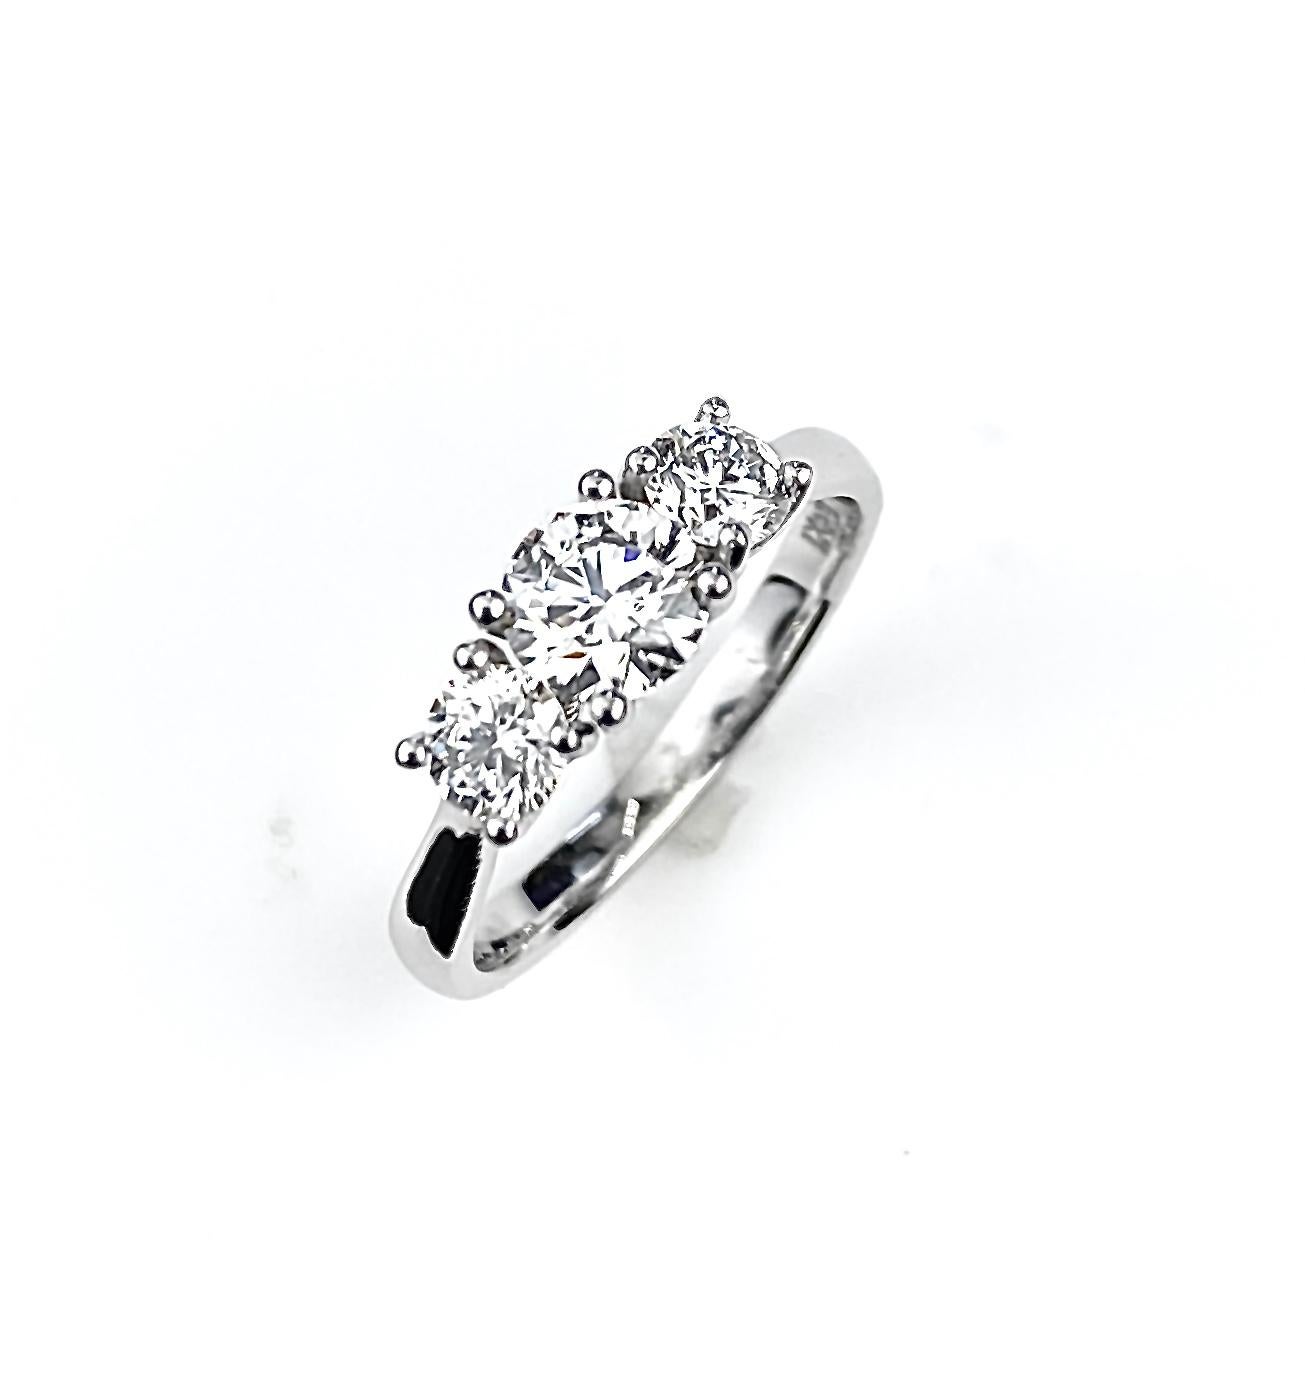 Three-Diamond Ring with 0.60 Carat Center Diamond in White Gold In New Condition For Sale In Toronto, Ontario